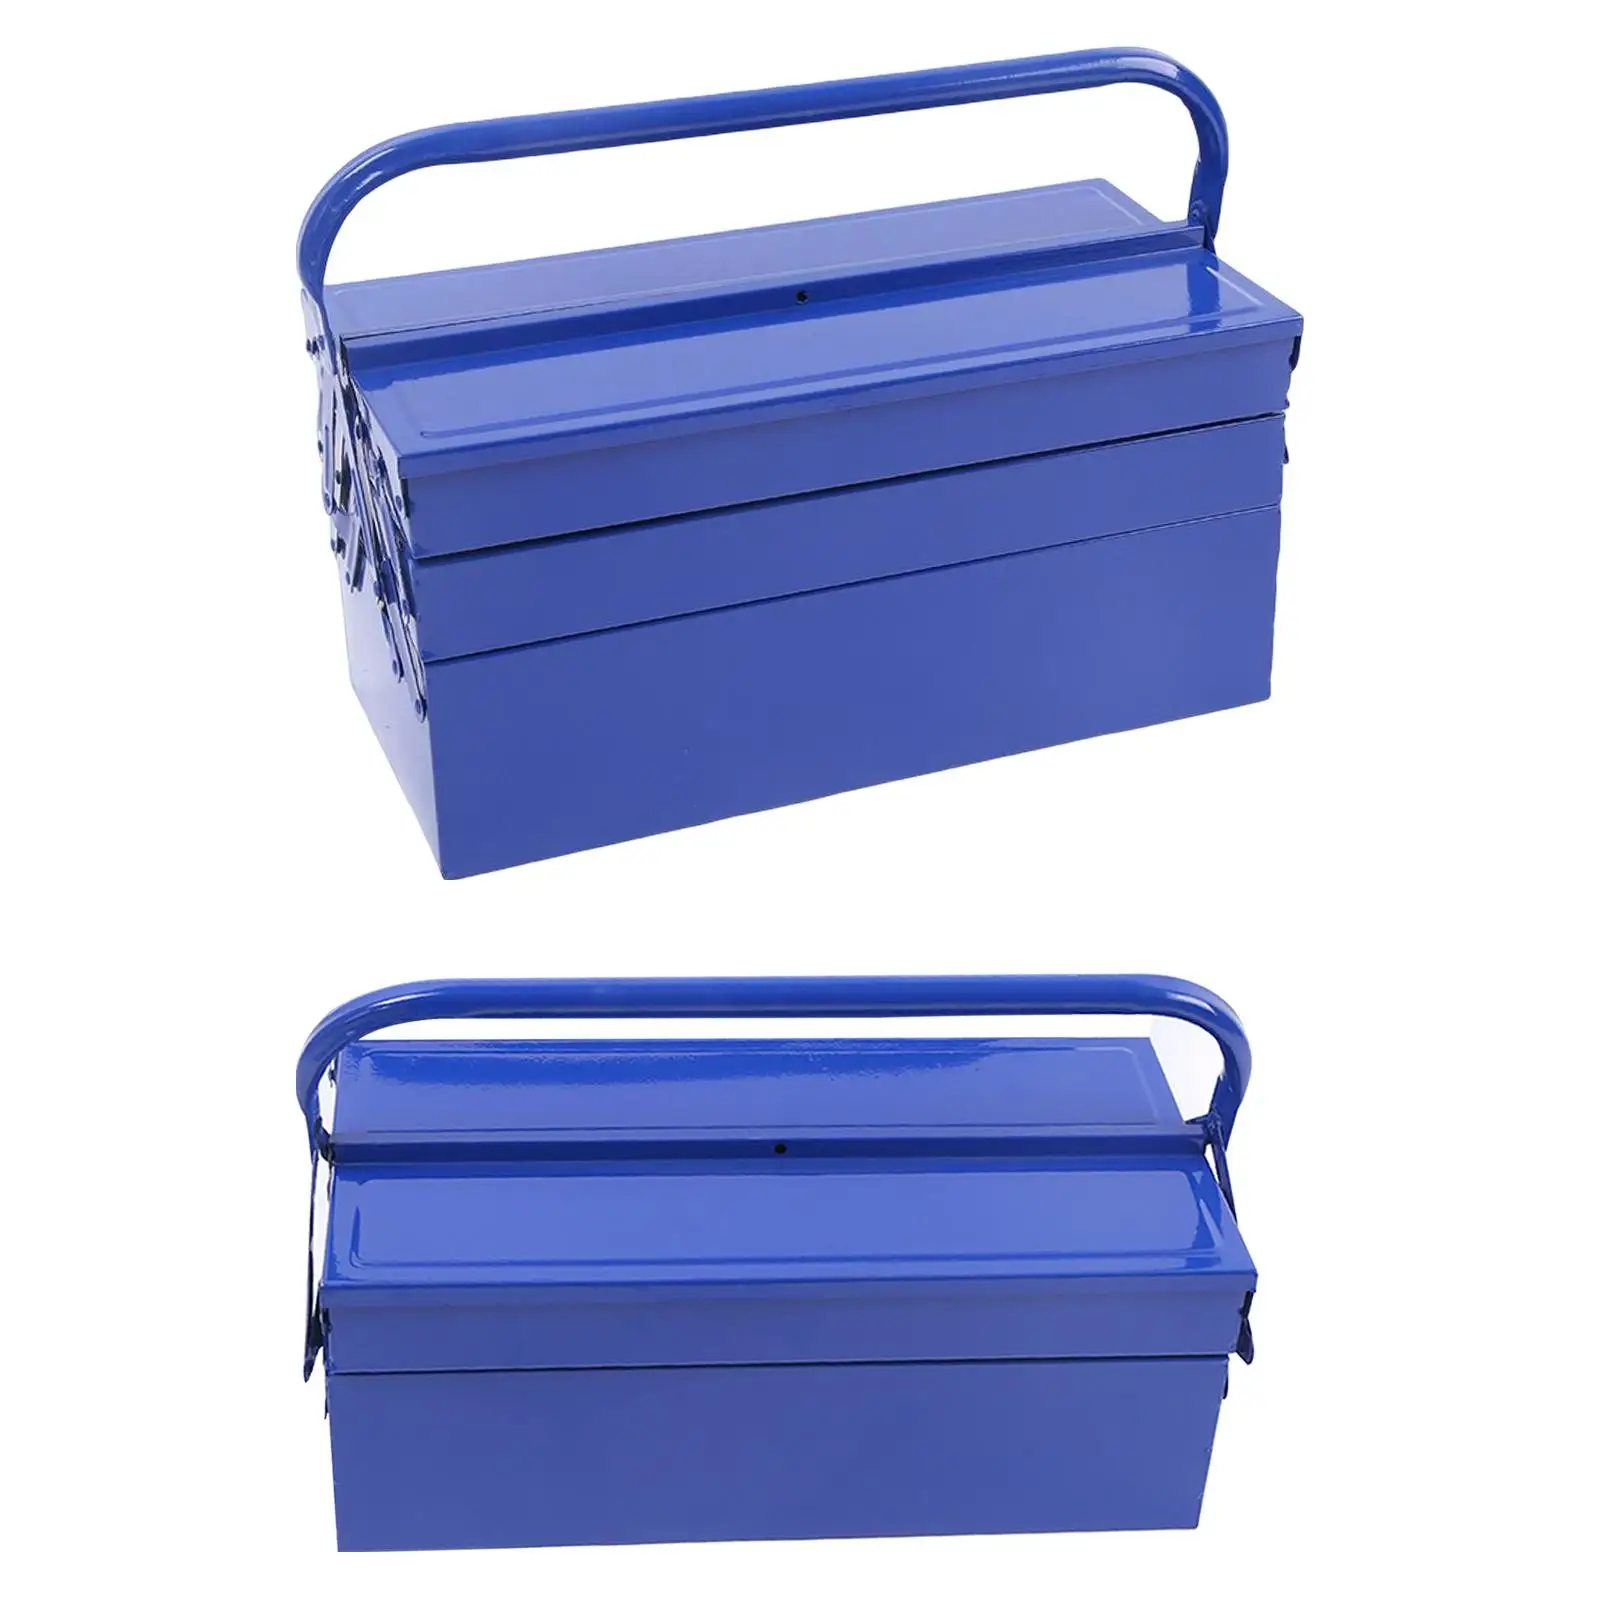 Toolbox Storage Box Durable Multipurpose Hand Tools Storage Repair Tool Storage Case Screw and Nuts Compartment Tray for Car